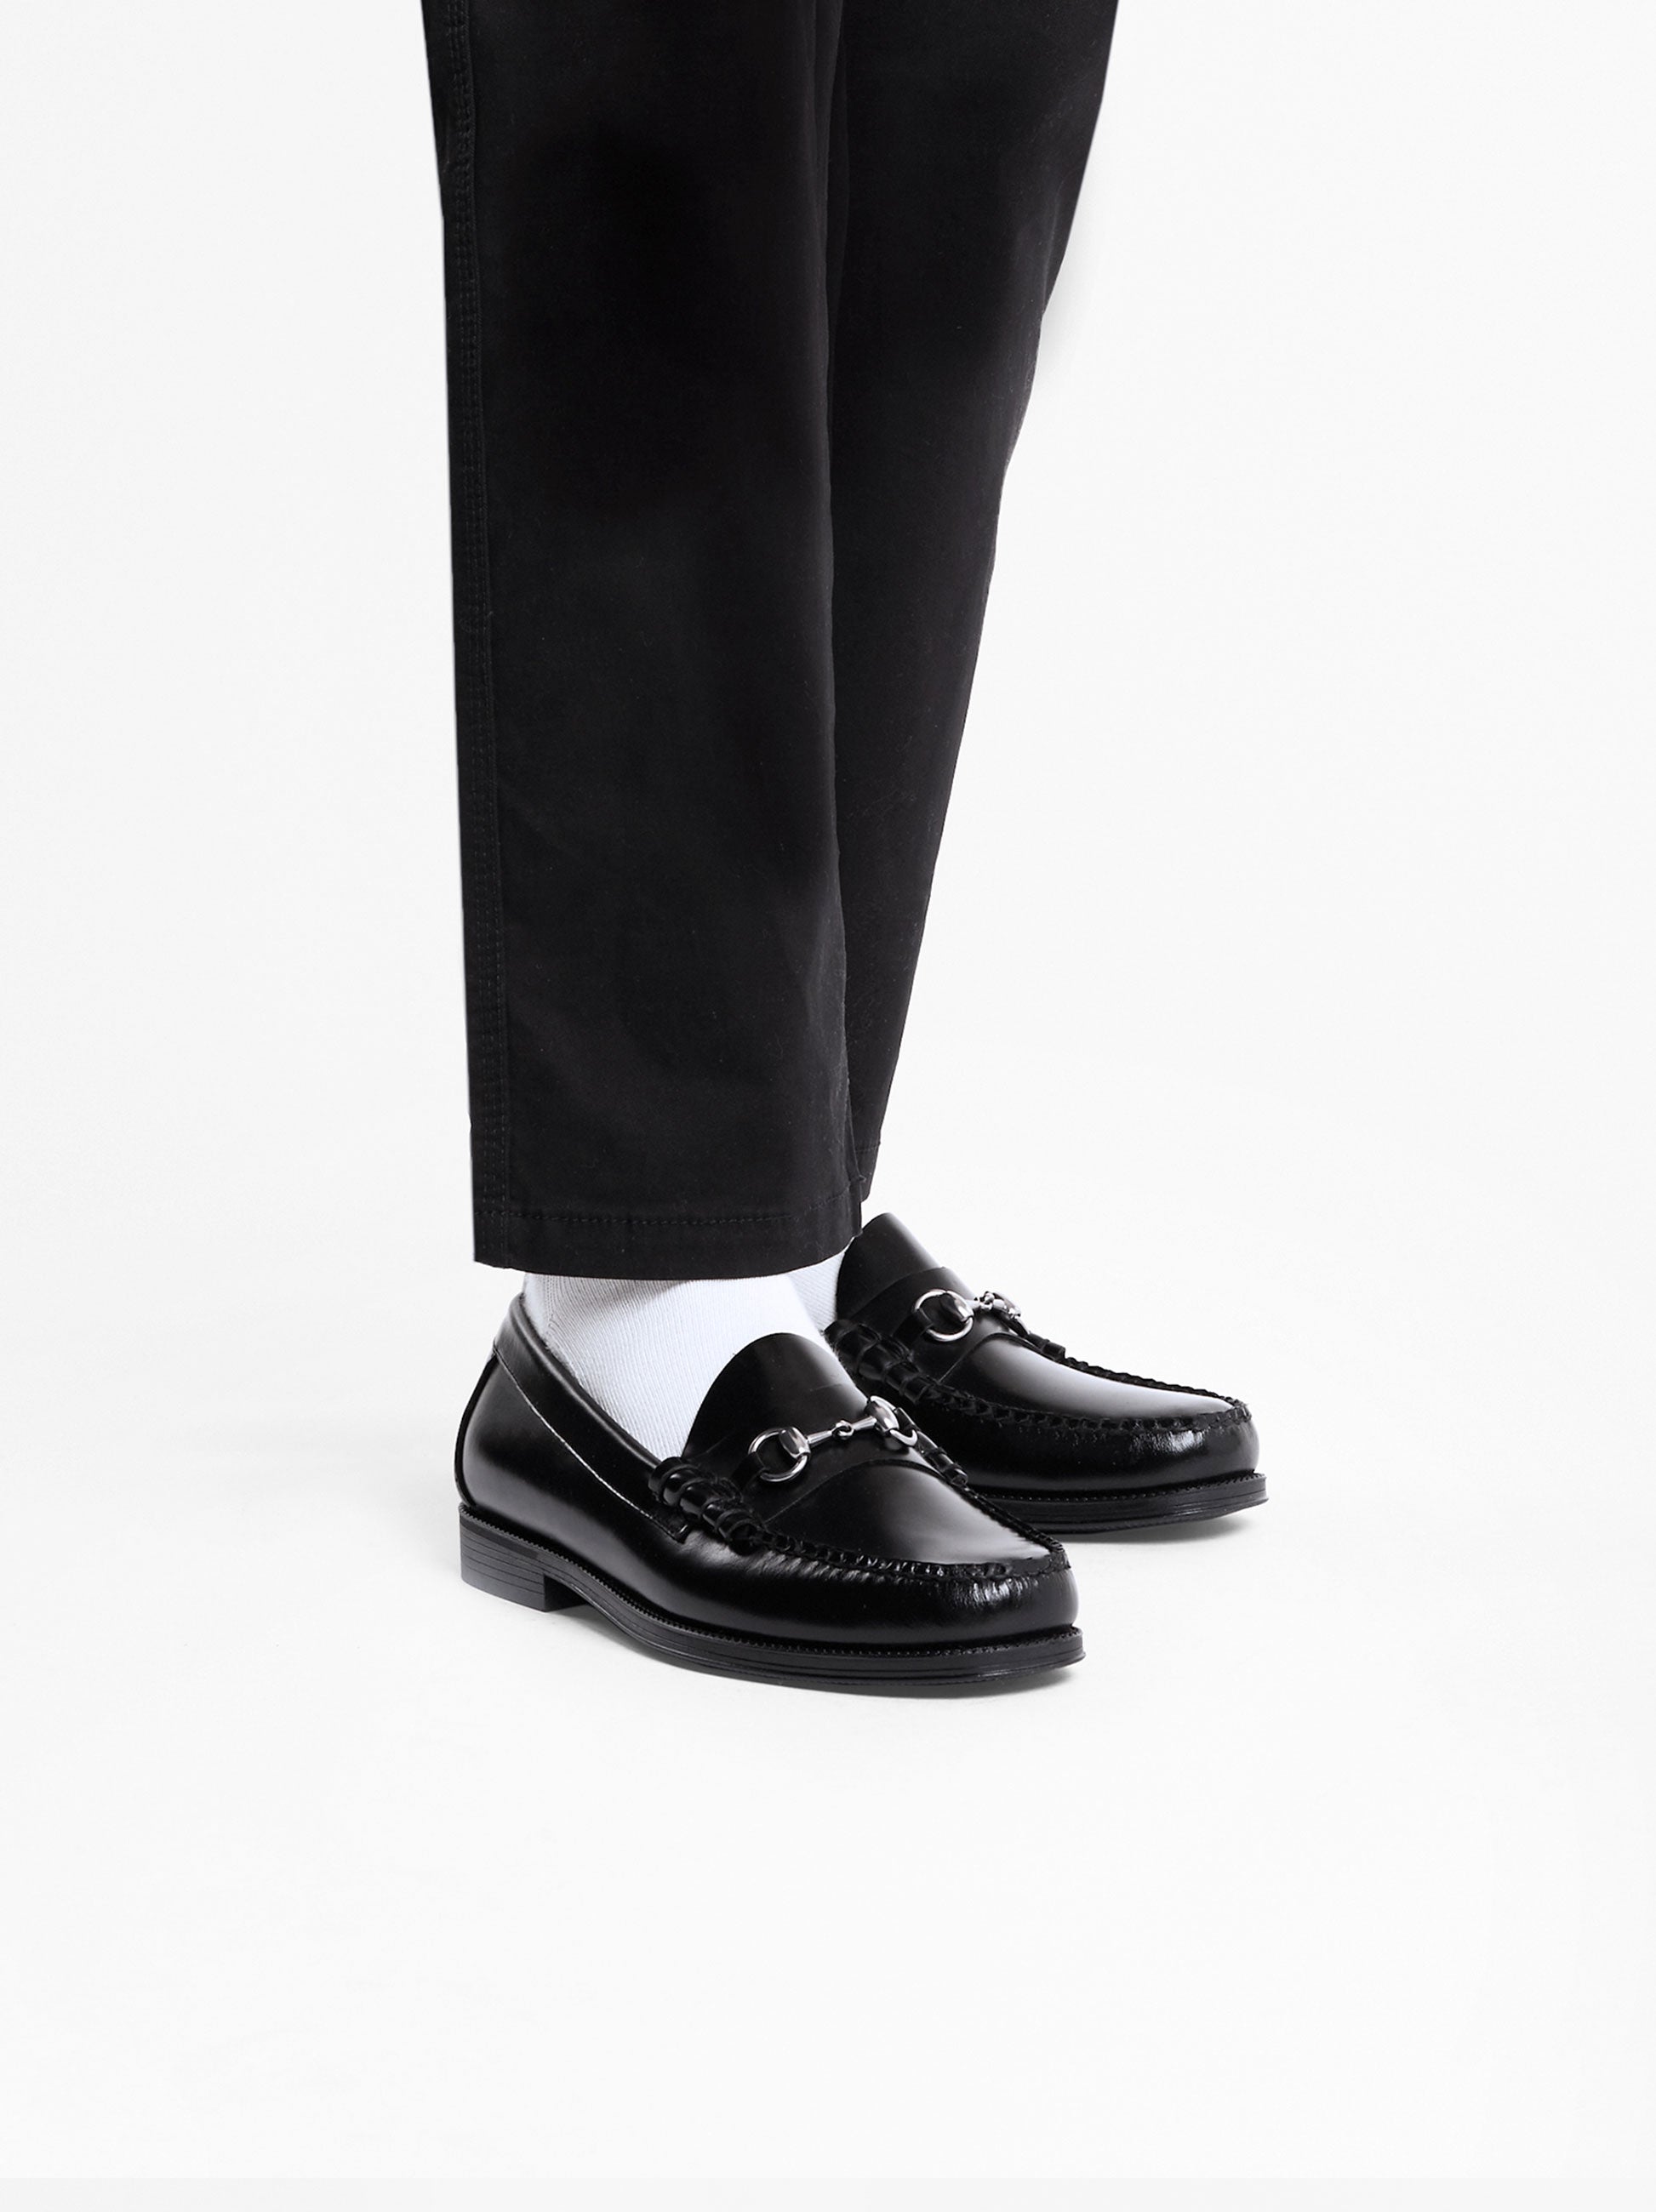 Mens Black Leather Loafers | Chain Loafers Mens – G.H.BASS 1876